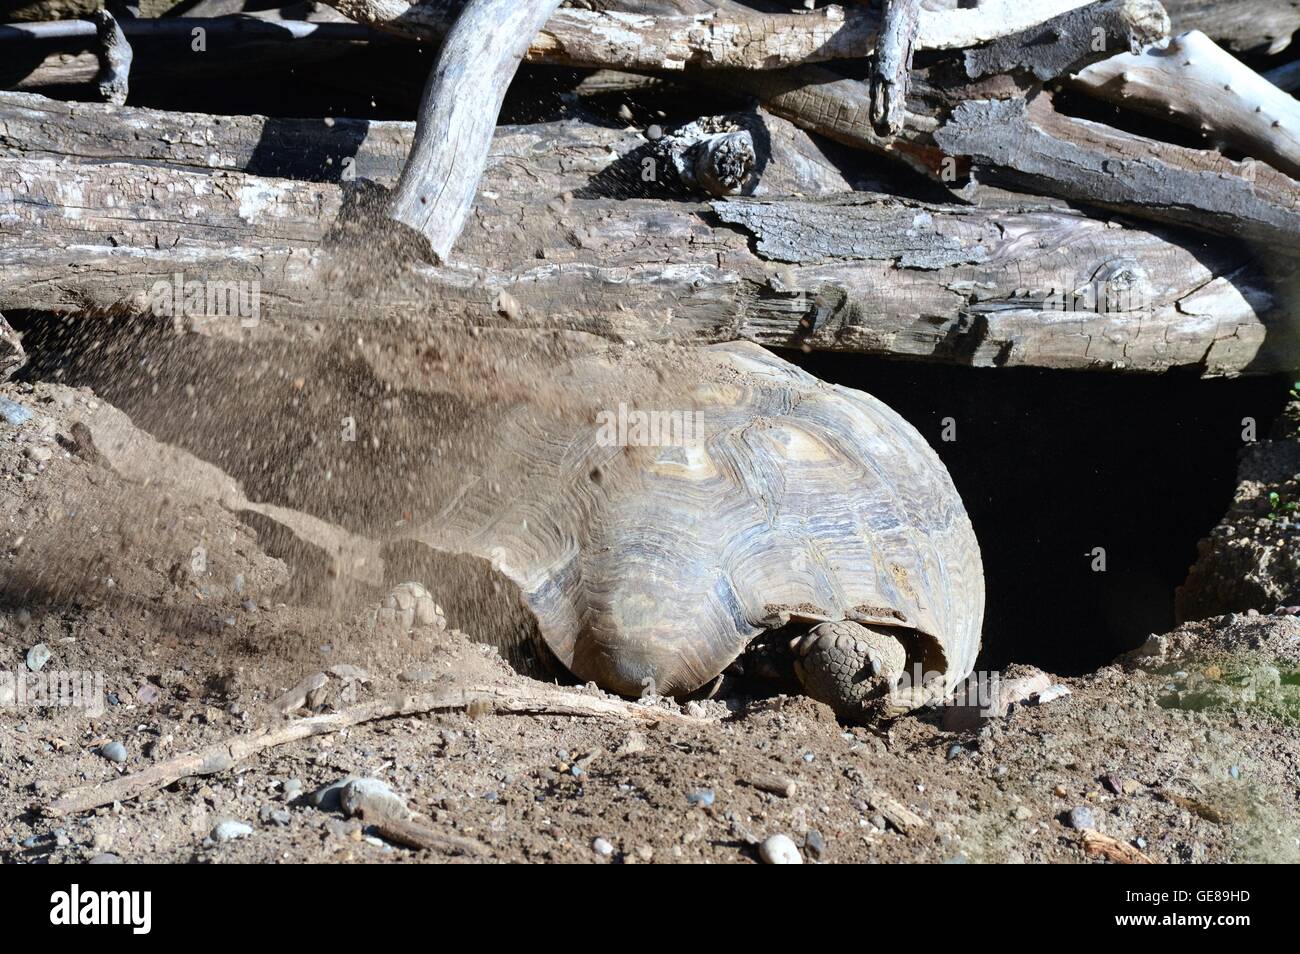 A Galapagos tortoise digging in the dirt to get out the the sun Stock Photo